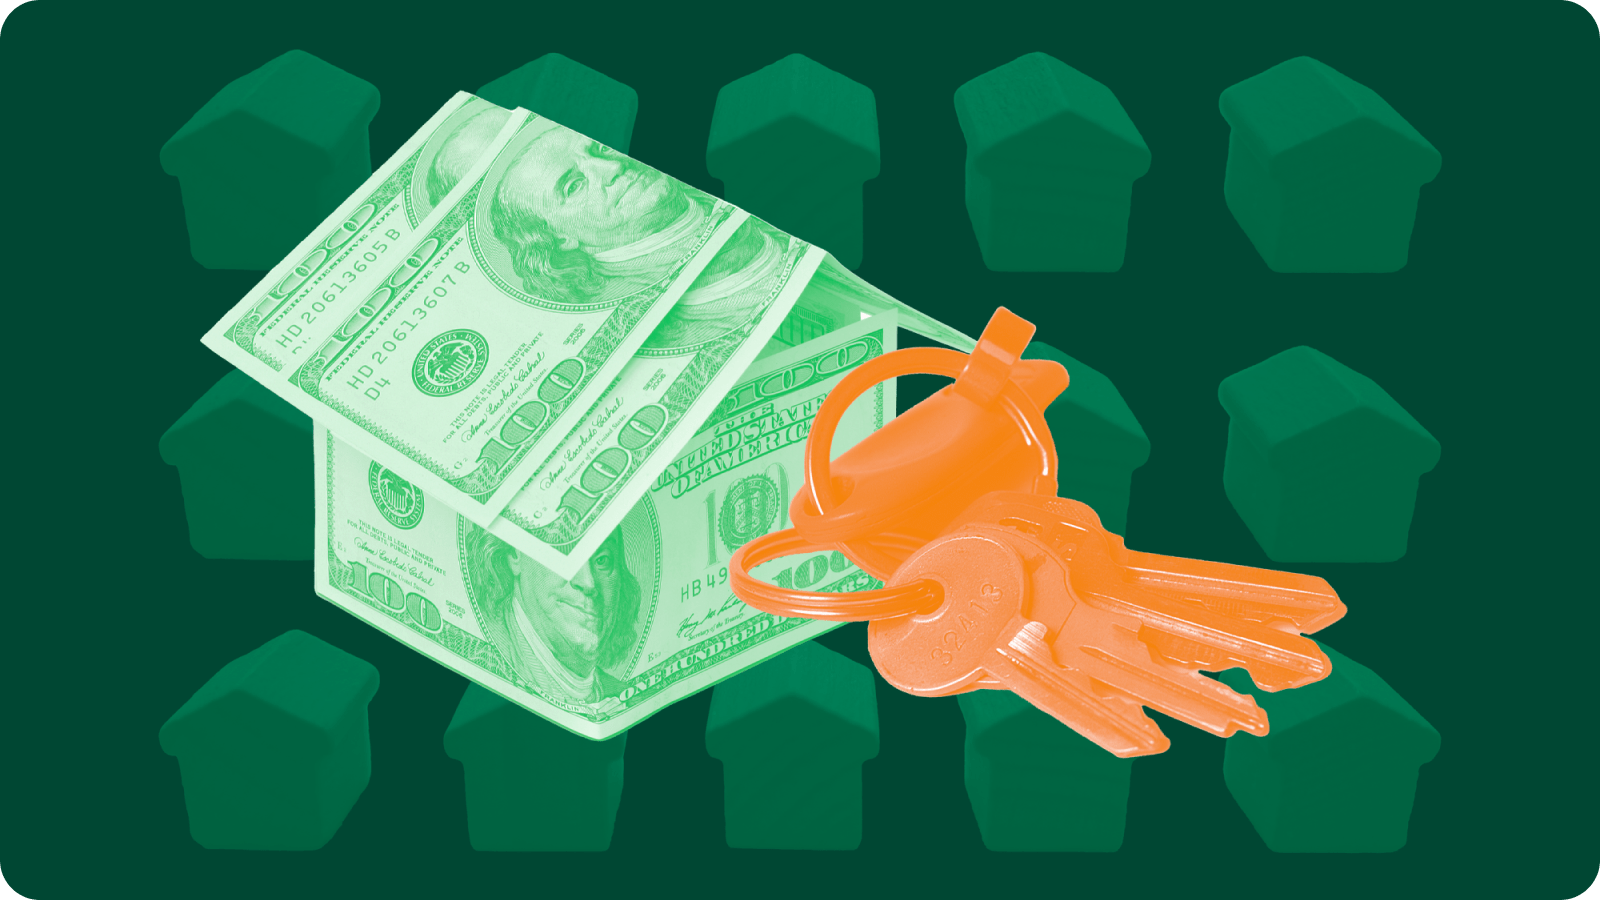 "Image of home made of dollar bill with orange keys